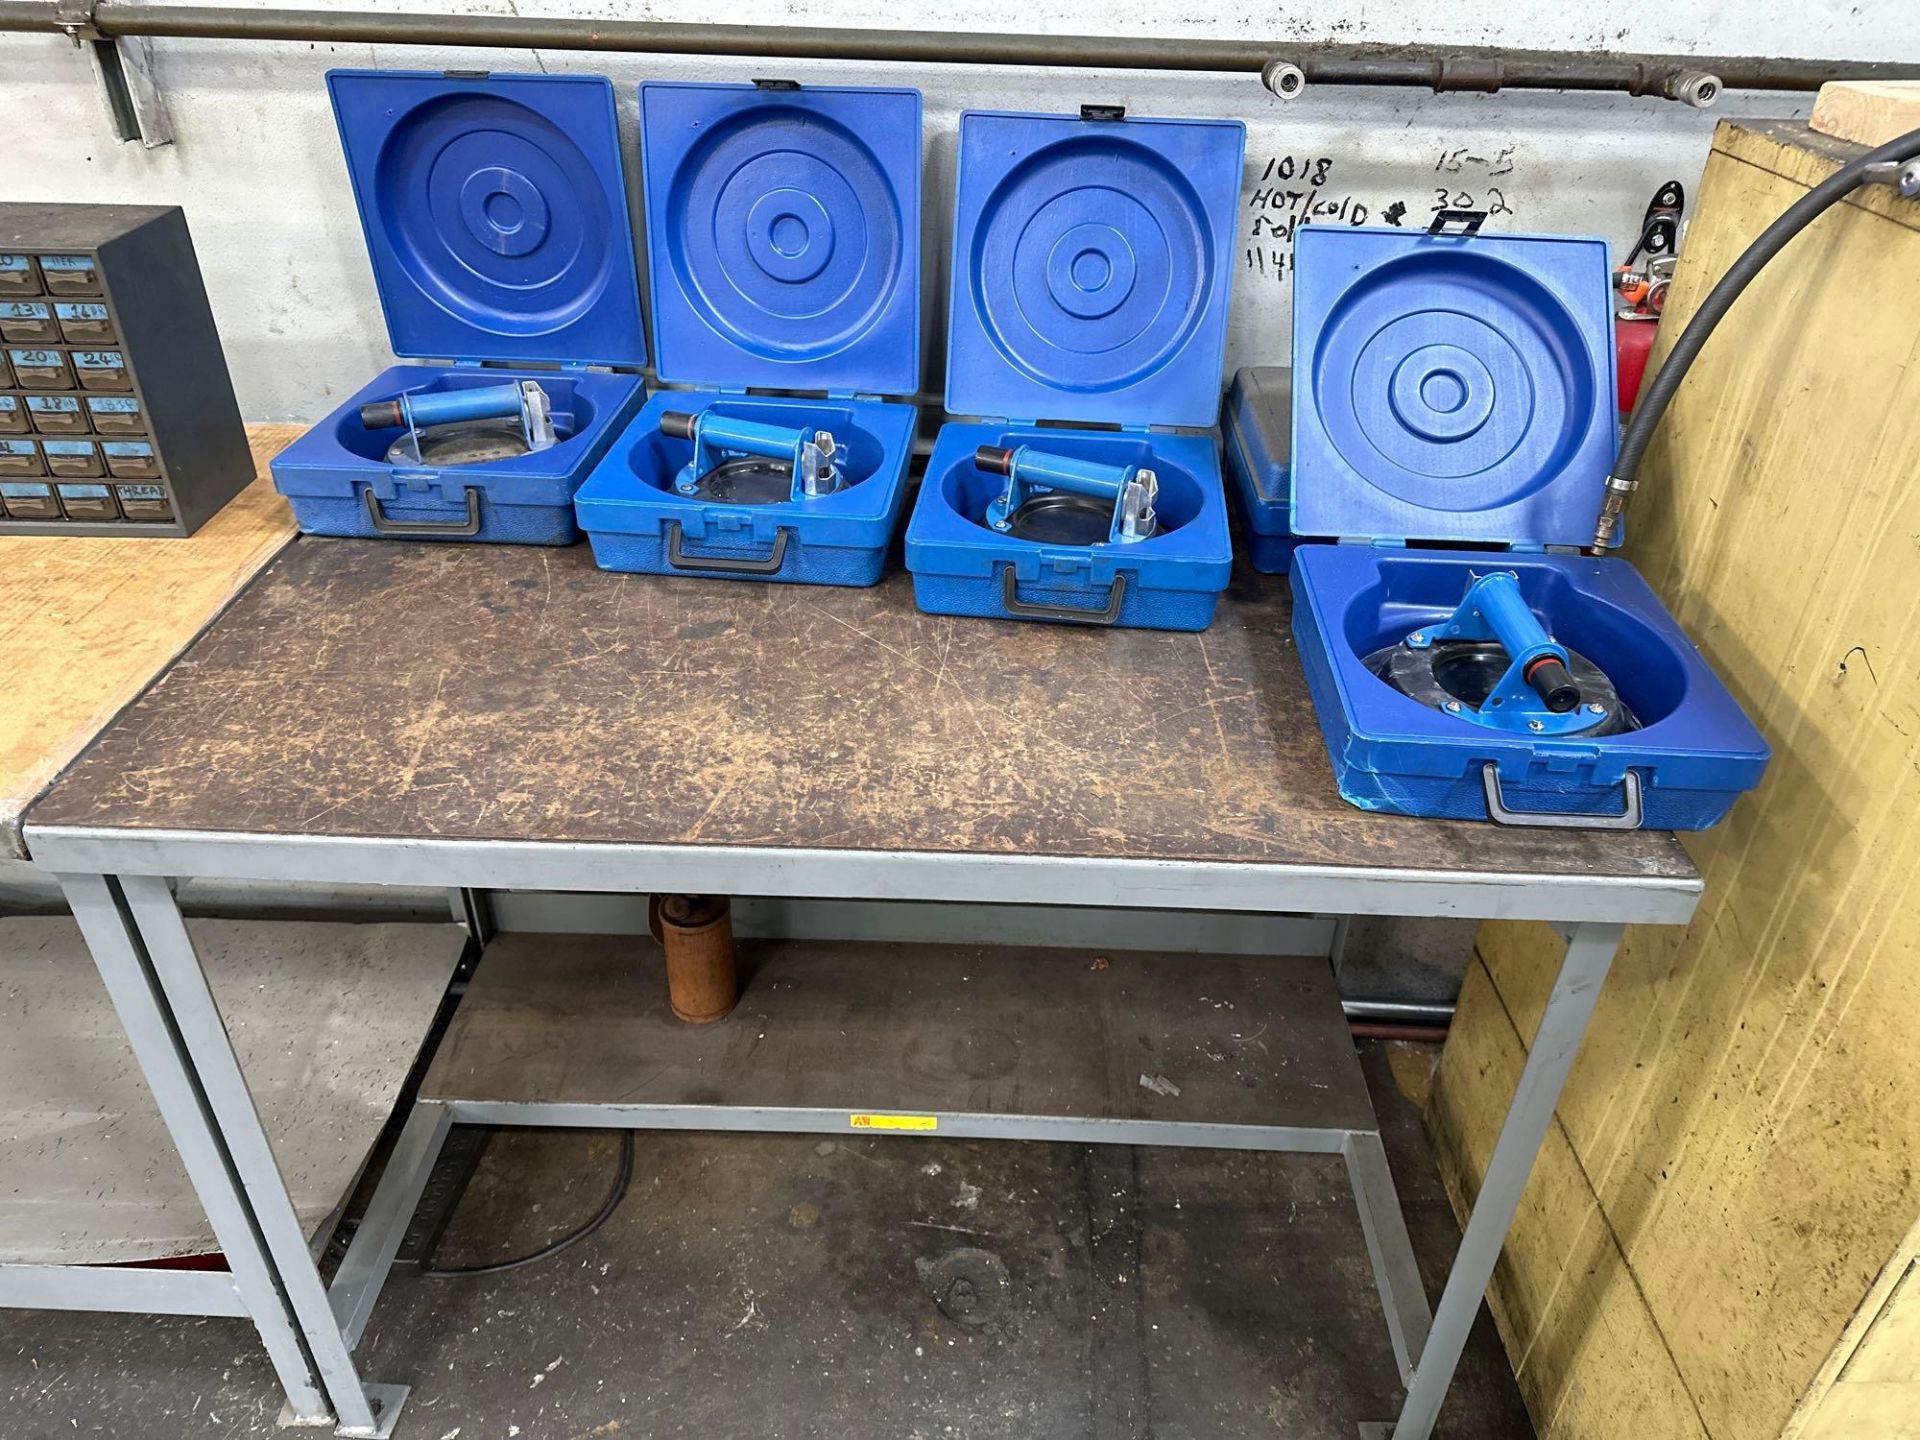 (6) Assorted Tables Including: Angle Plates, Hardware, CT50 Holders and Power Grip Suction Cups - Bild 4 aus 6